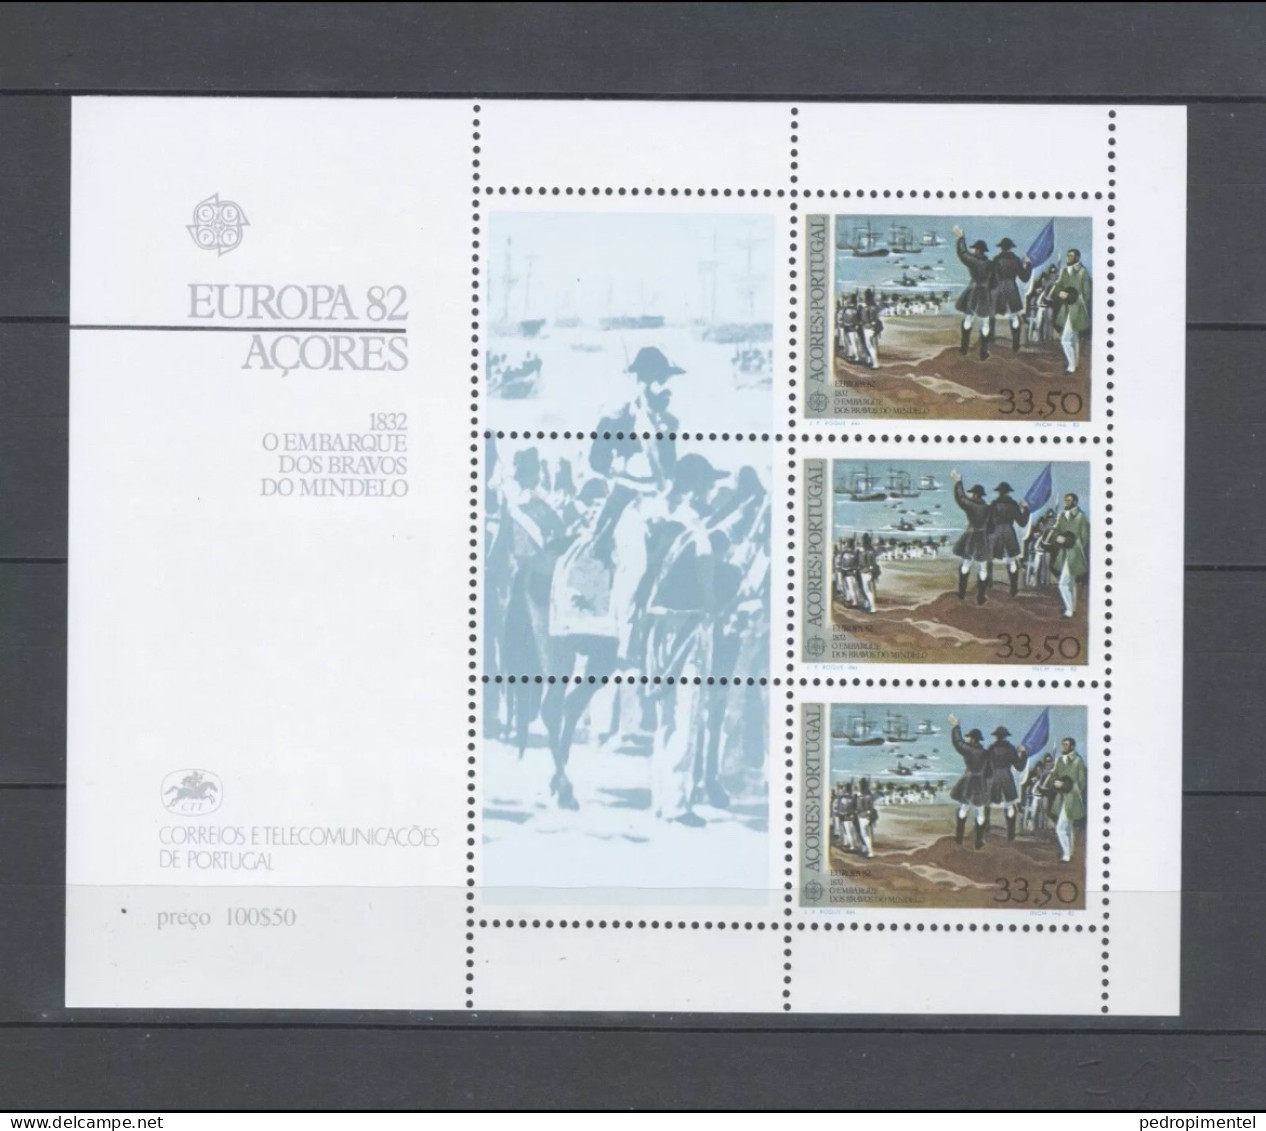 Portugal Azores Madeira 1982 "Europa CEPT Historical Events" Condition MNH OG Mundifil #1569-1571 (3 Minisheets) - Ungebraucht